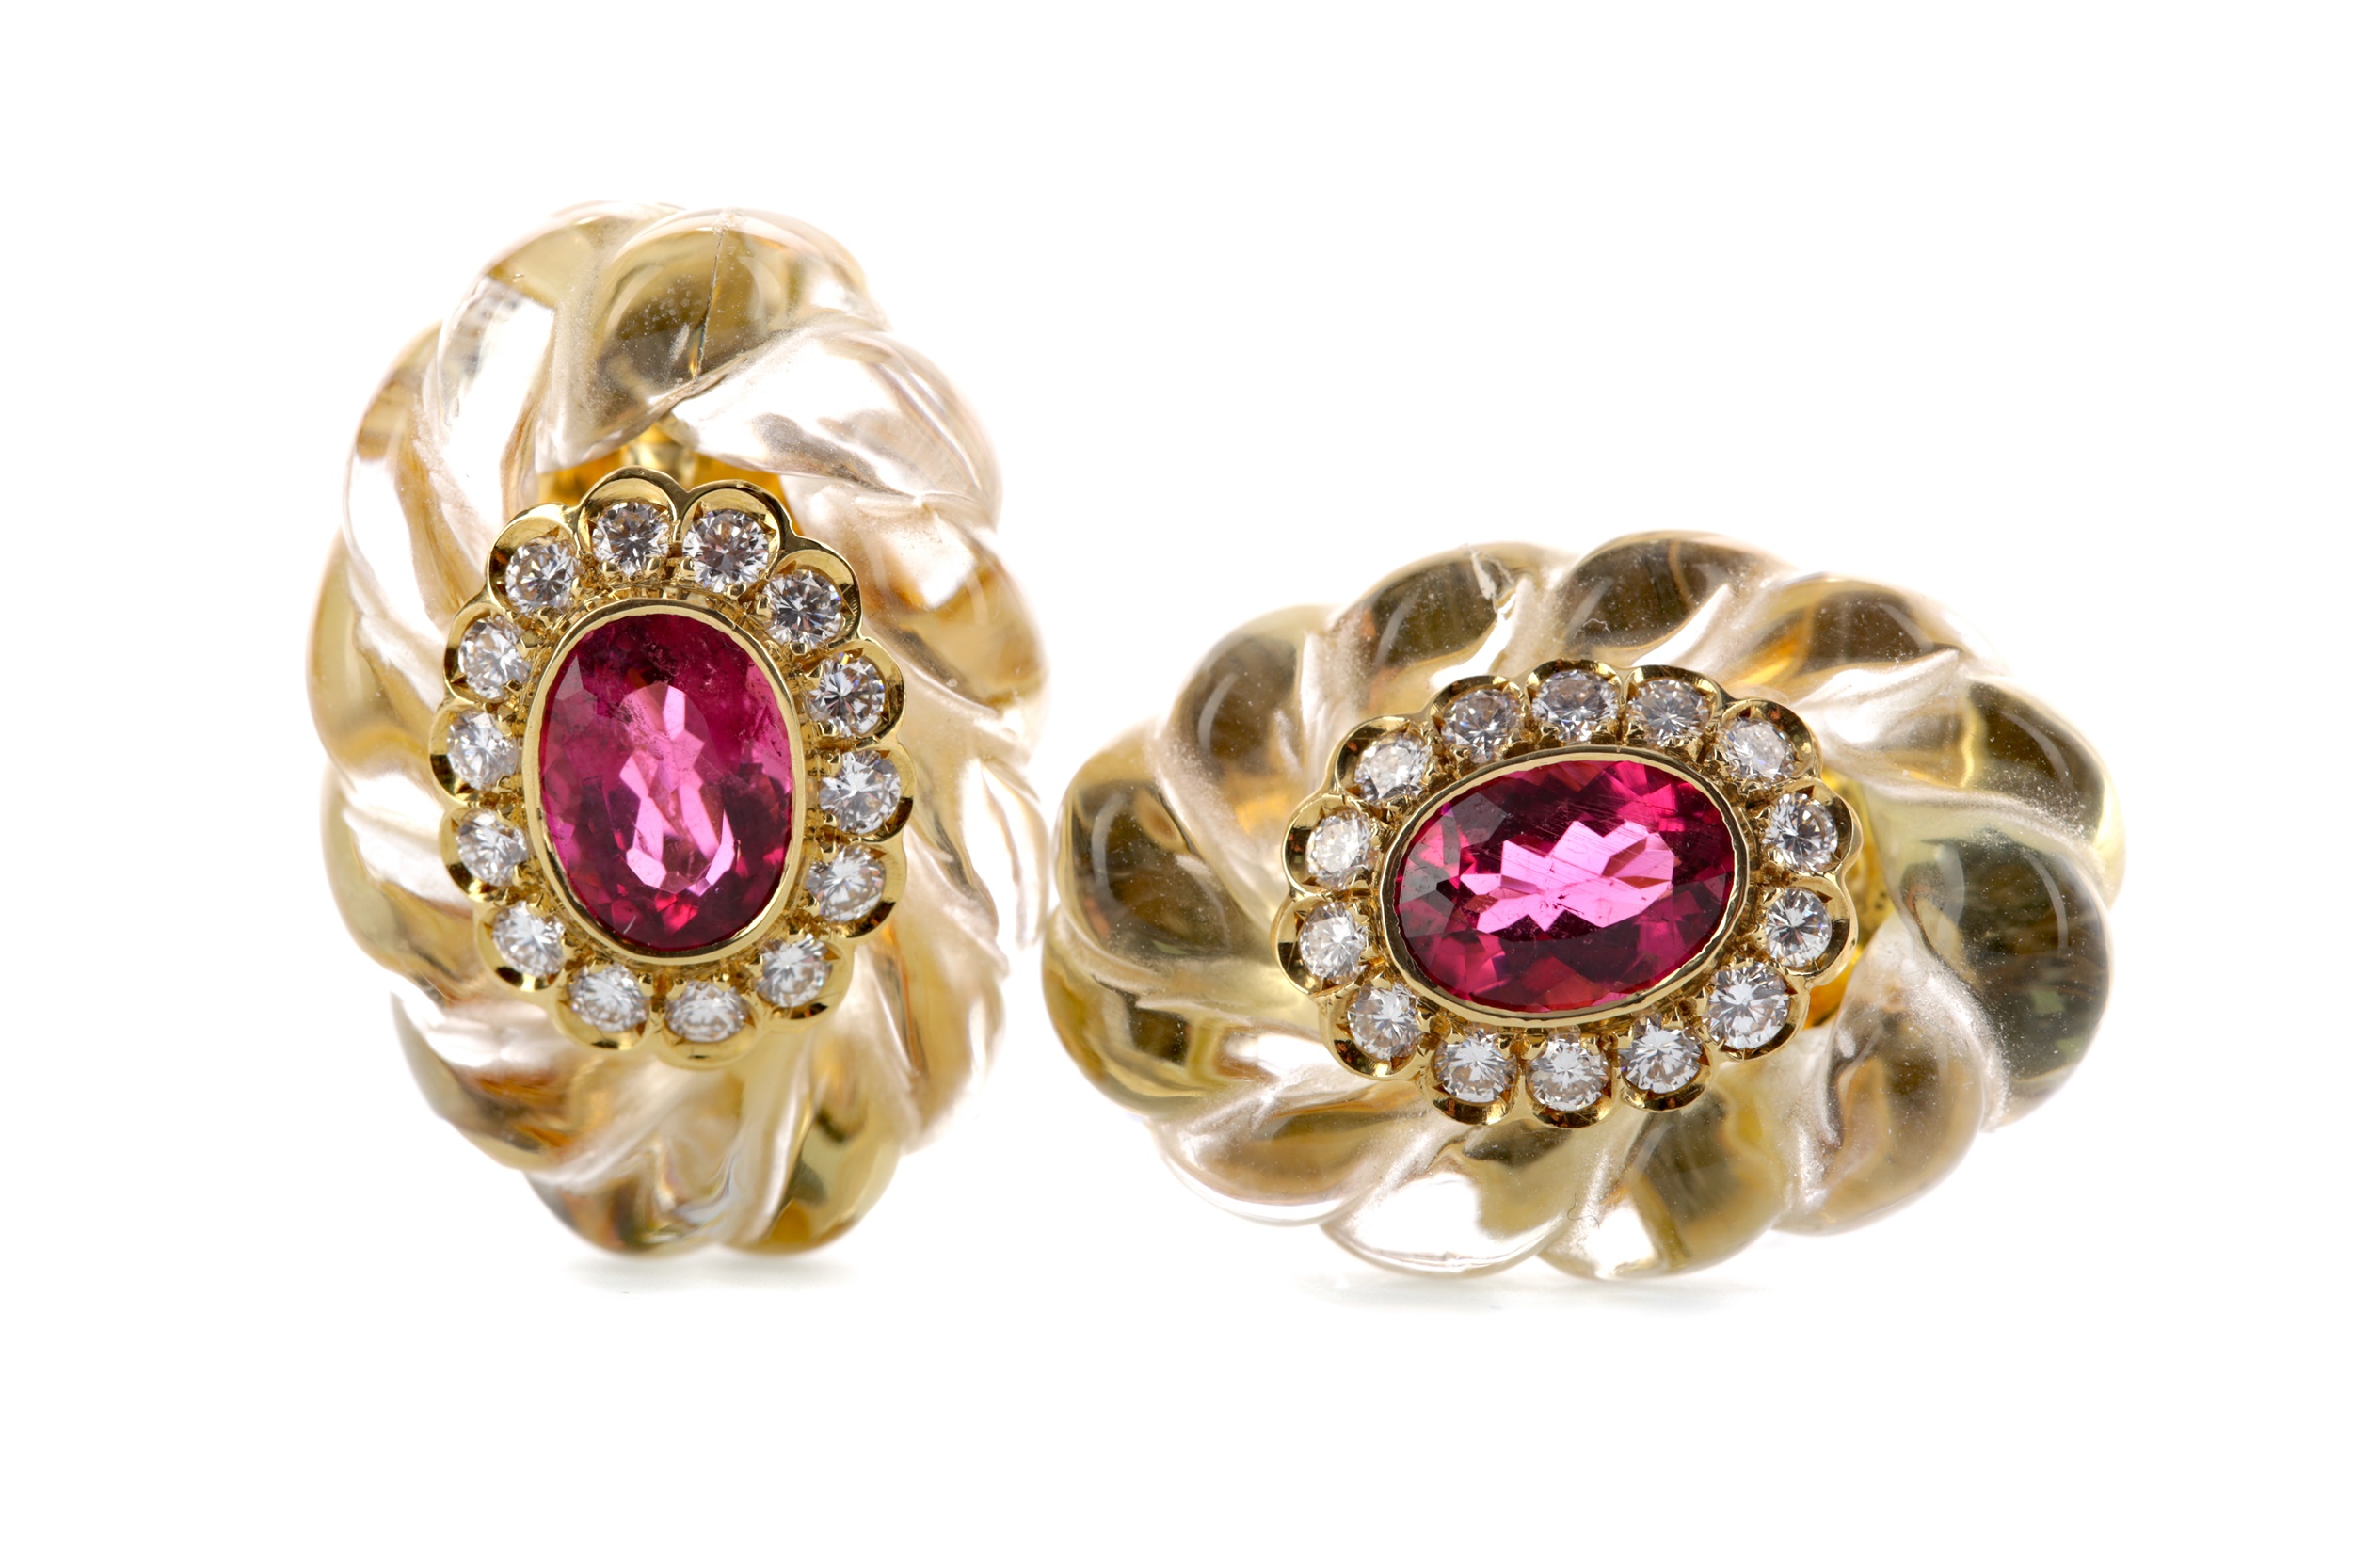 A PAIR OF ROCK CRYSTAL, RUBELLITE AND DIAMOND EARRINGS